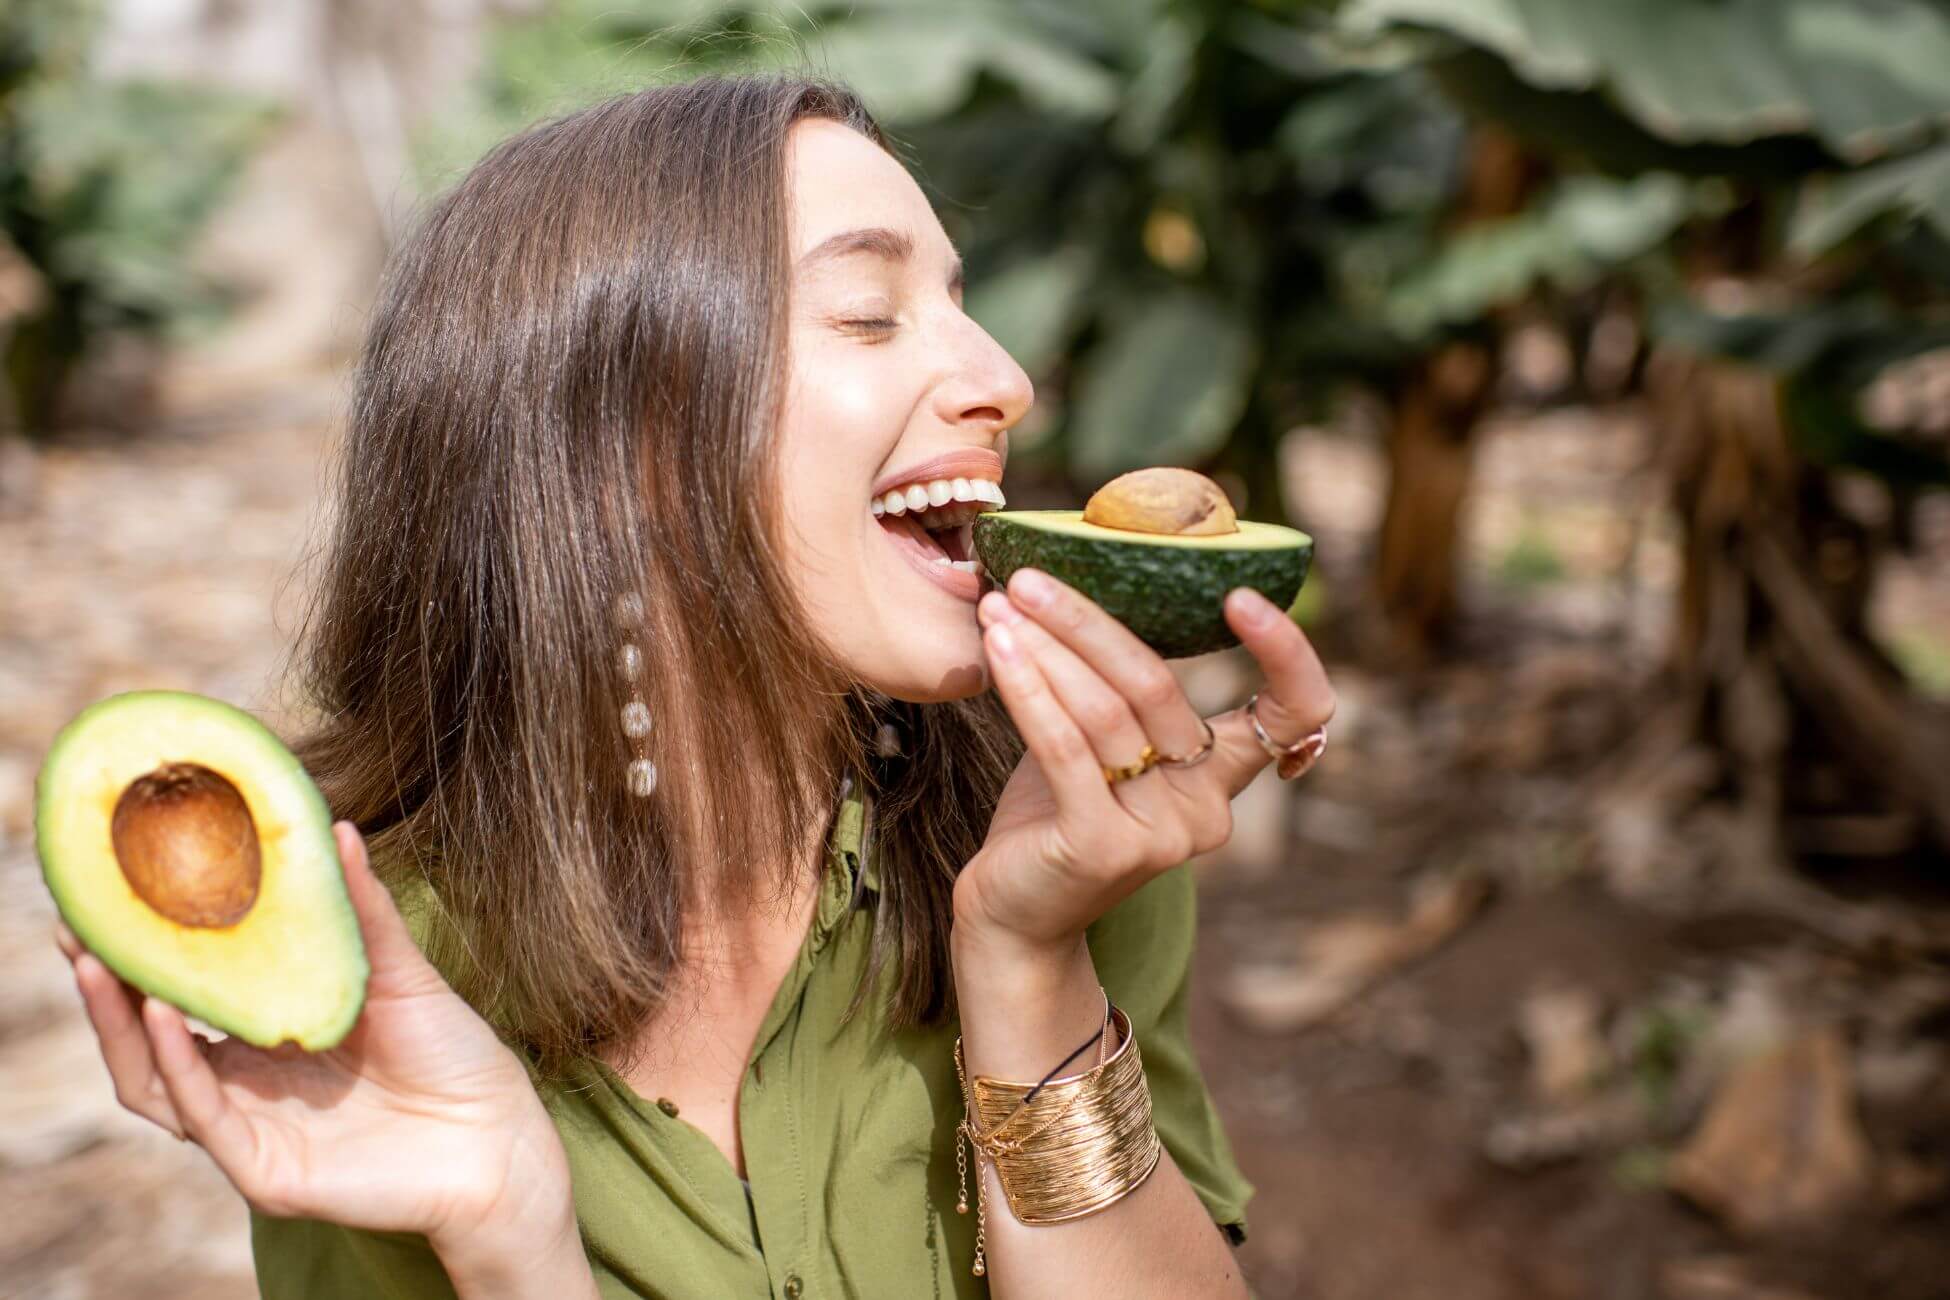 A smiling woman with shoulder-length brown hair is outdoors, holding an avocado half close to her mouth, appearing to take a bite. 